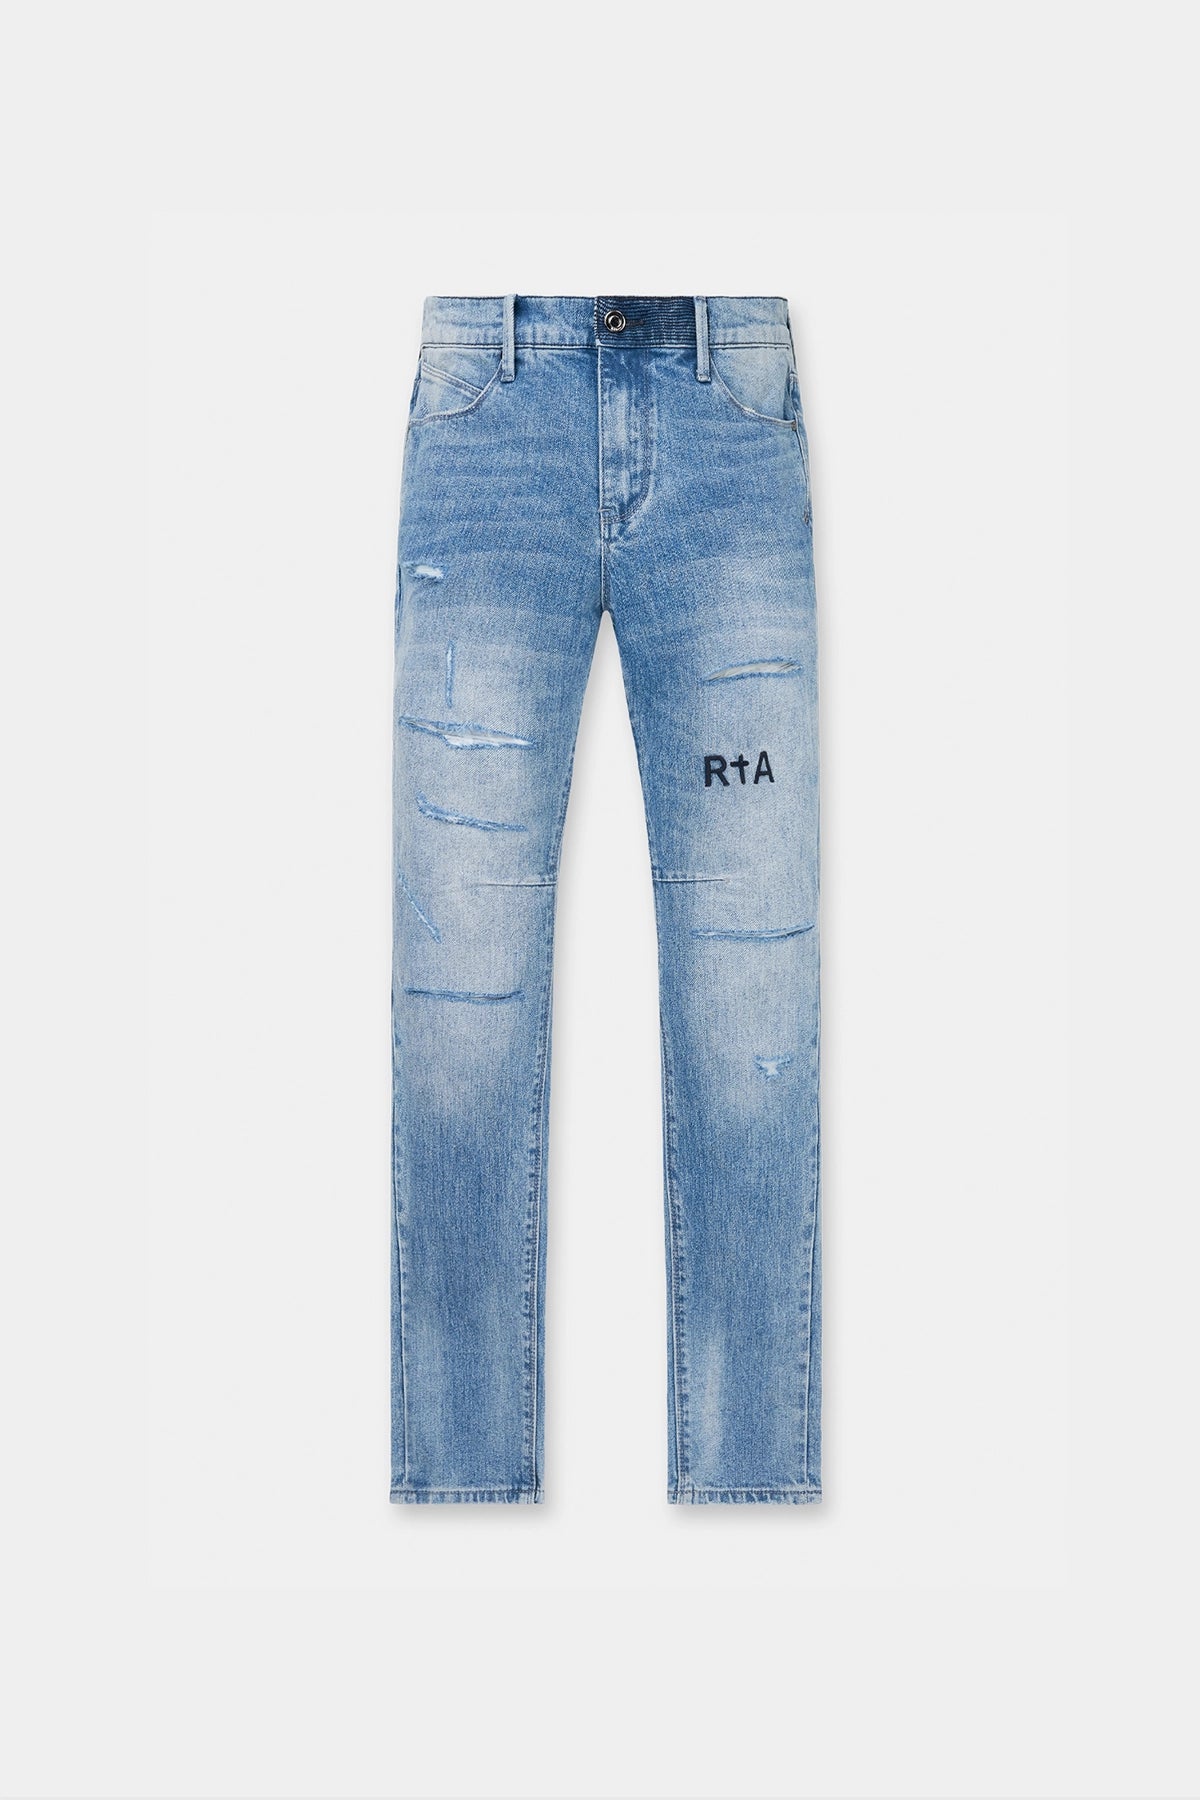 Buy Designer Men's Jeans Collection from RTA Official Store